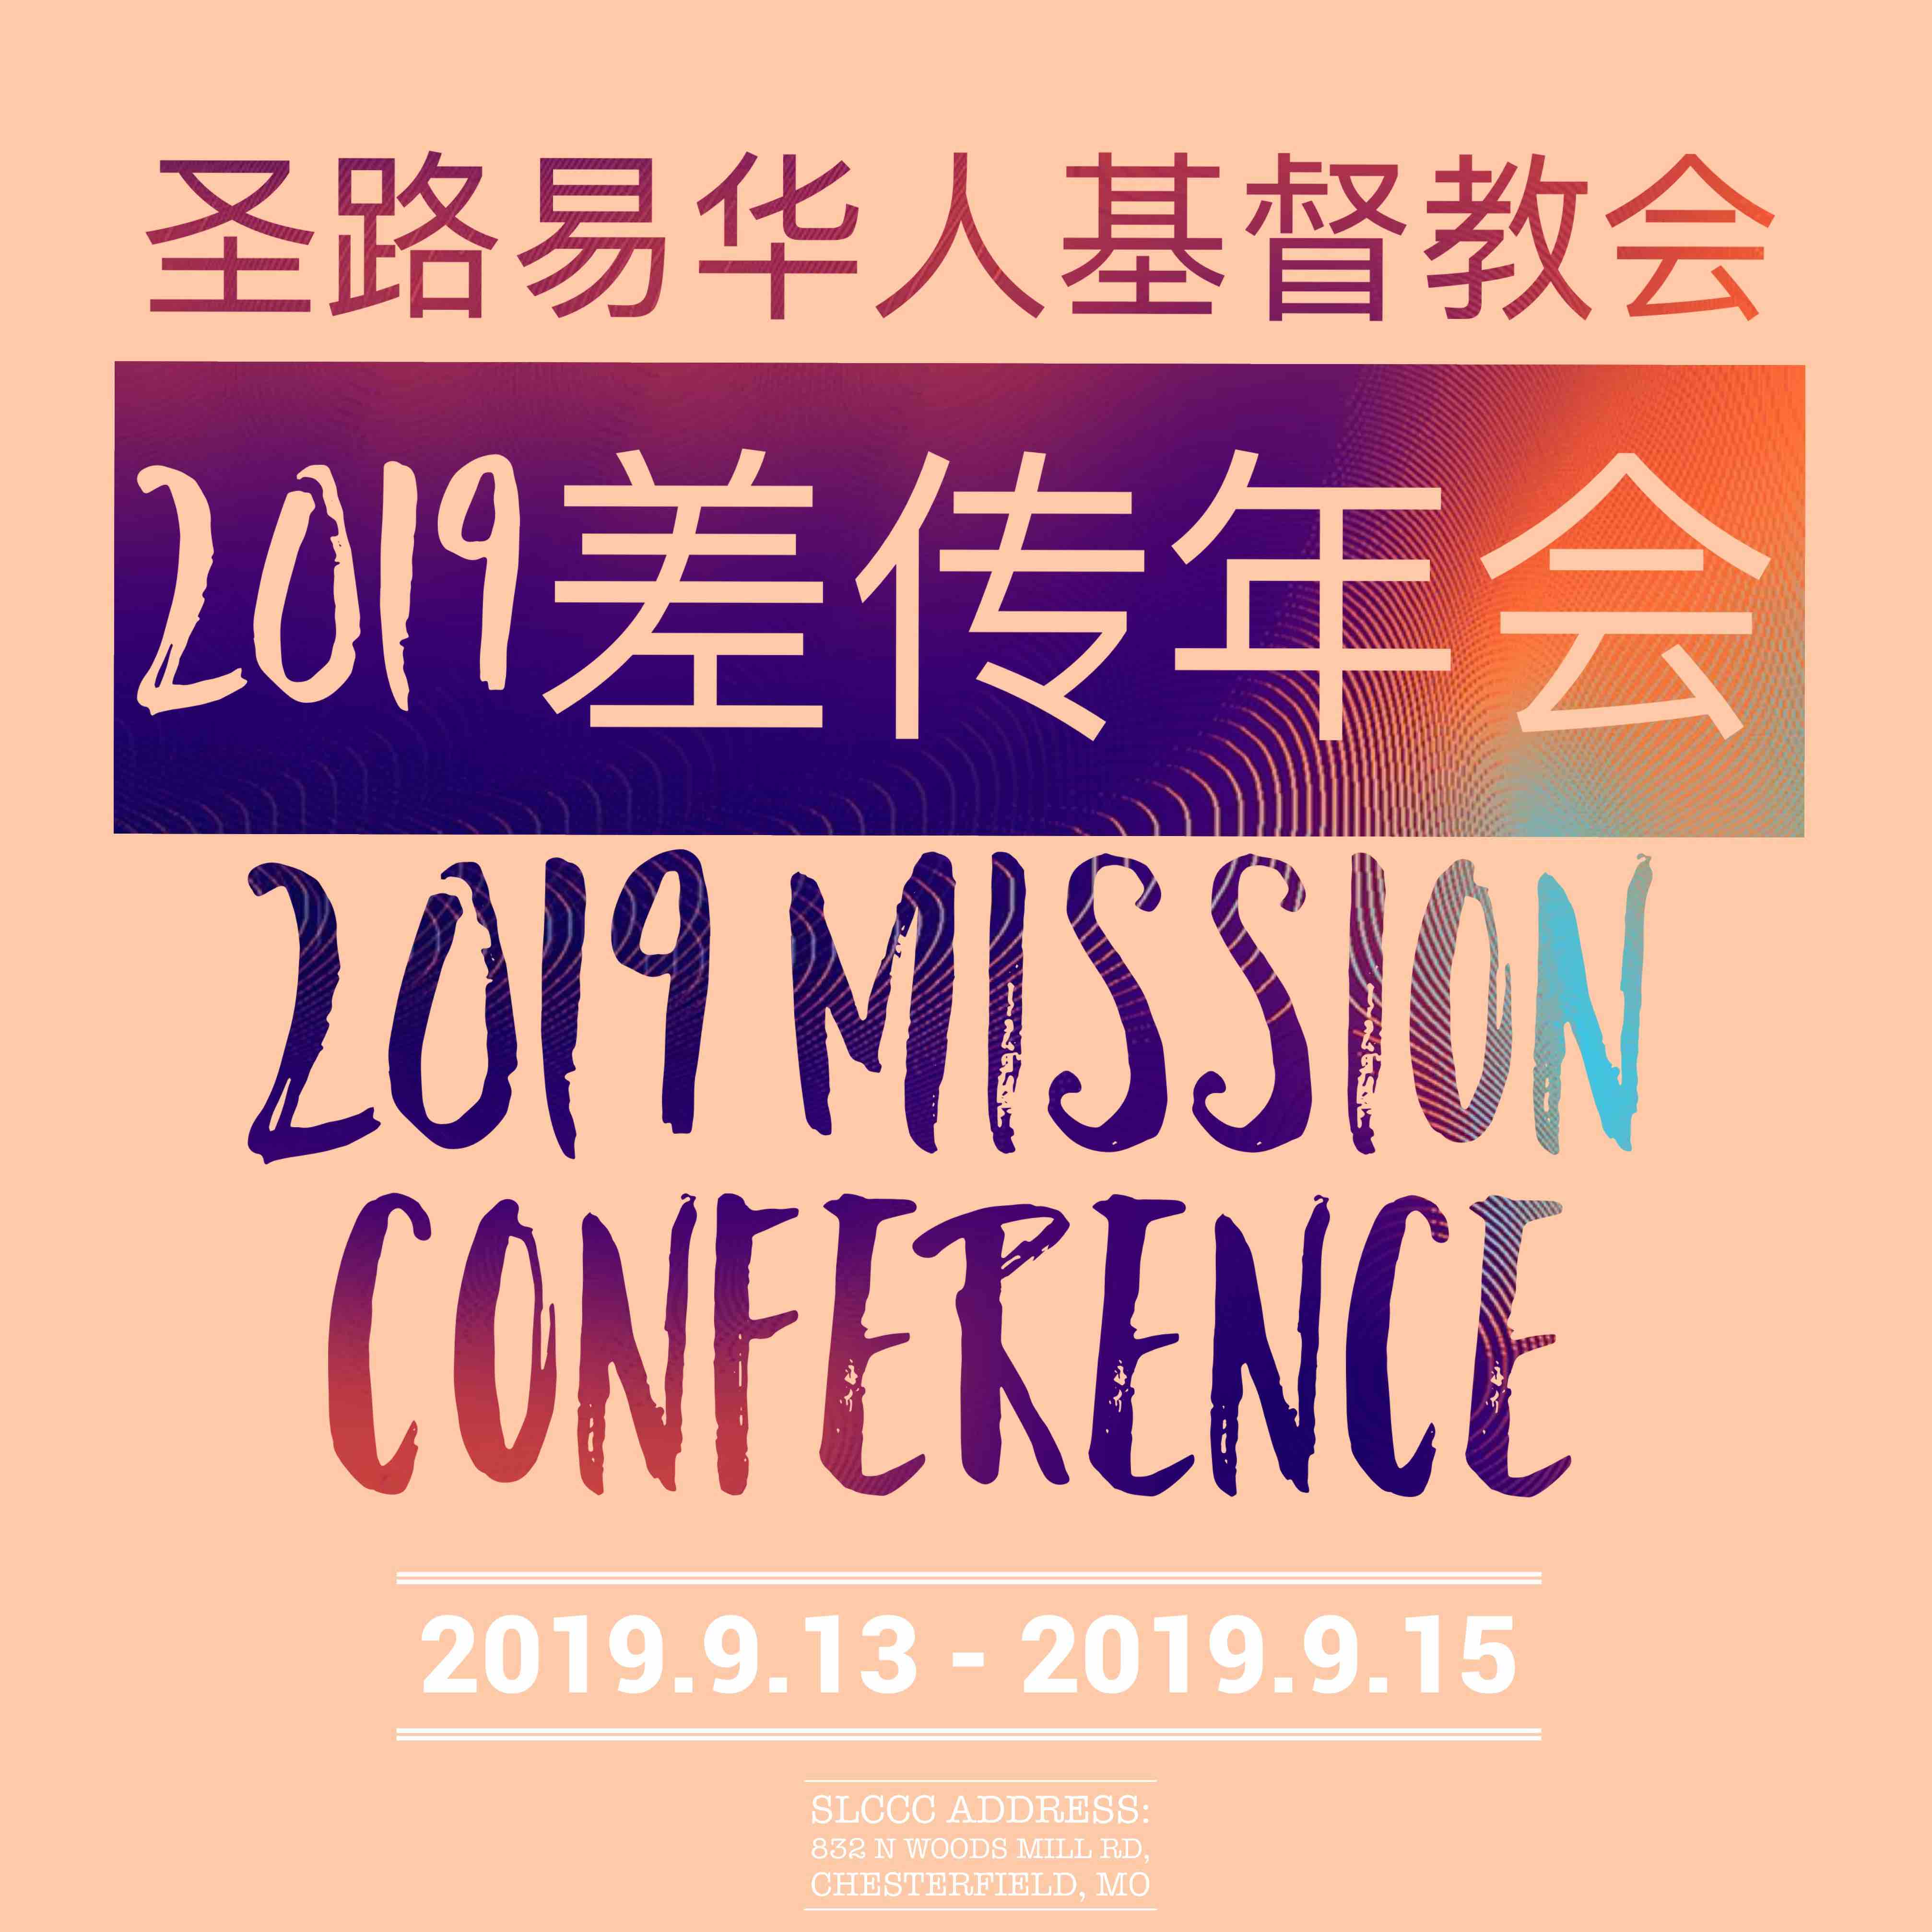 2019-mission-conference